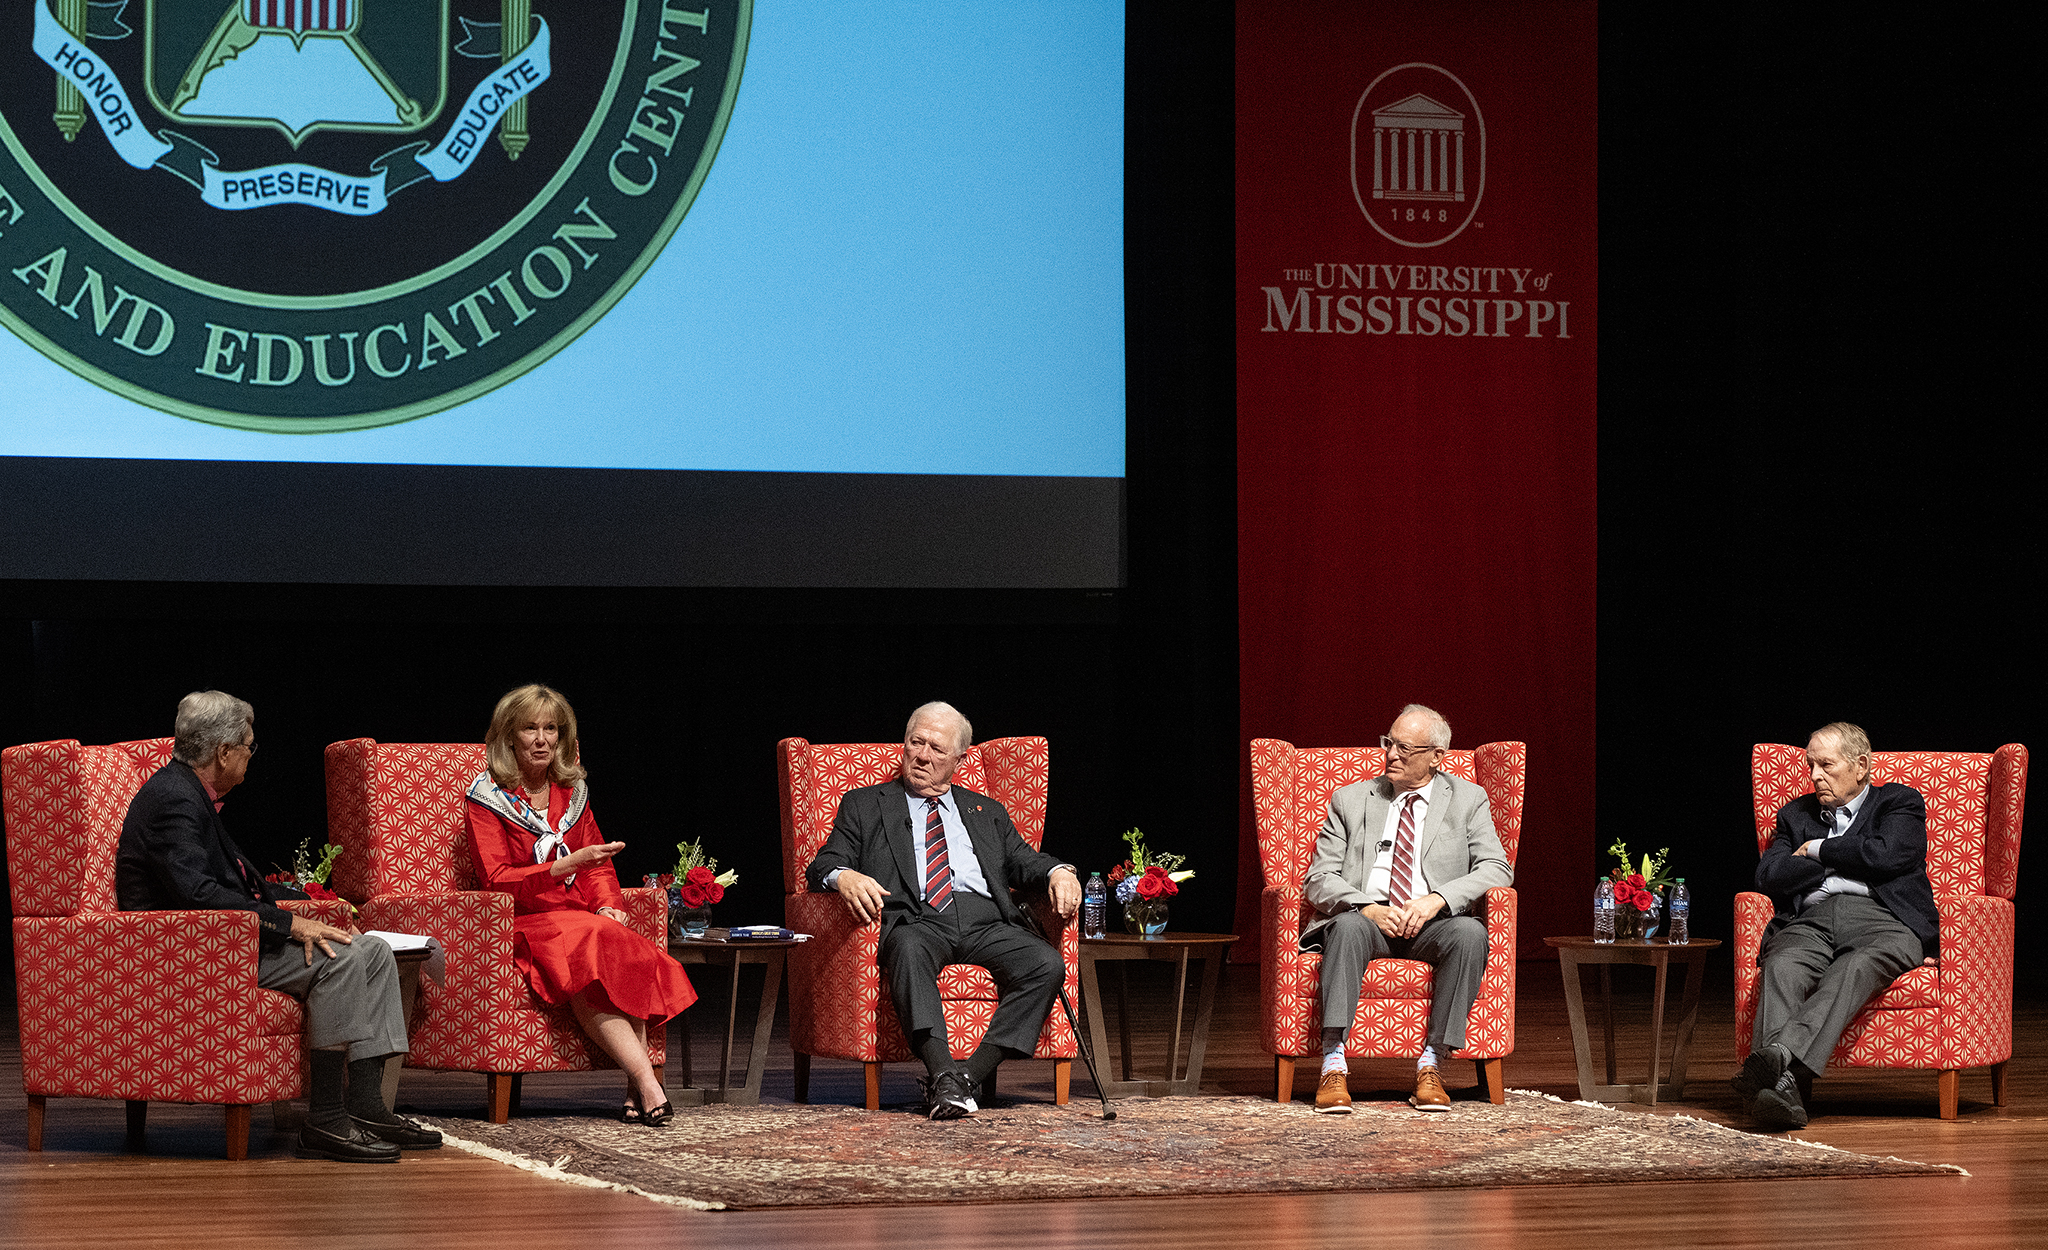 Former U.S. Sen. Trent Lott (left), Dr. Deborah Birx, former Mississippi Gov. Haley Barbour, former Pennsylvania press secretary Paul Critchlow and former White House Chief of Staff Sam Skinner discuss the challenges and lessons of leadership through crisis and national tragedy at the Gertrude C. Ford Center for the Performing Arts. The panel was hosted by the Army Heritage Center Foundation and the BGR Group and coordinated by the university’s Trent Lott Leadership Institute. Photo by Thomas Graning/Ole Miss Digital Imaging Services